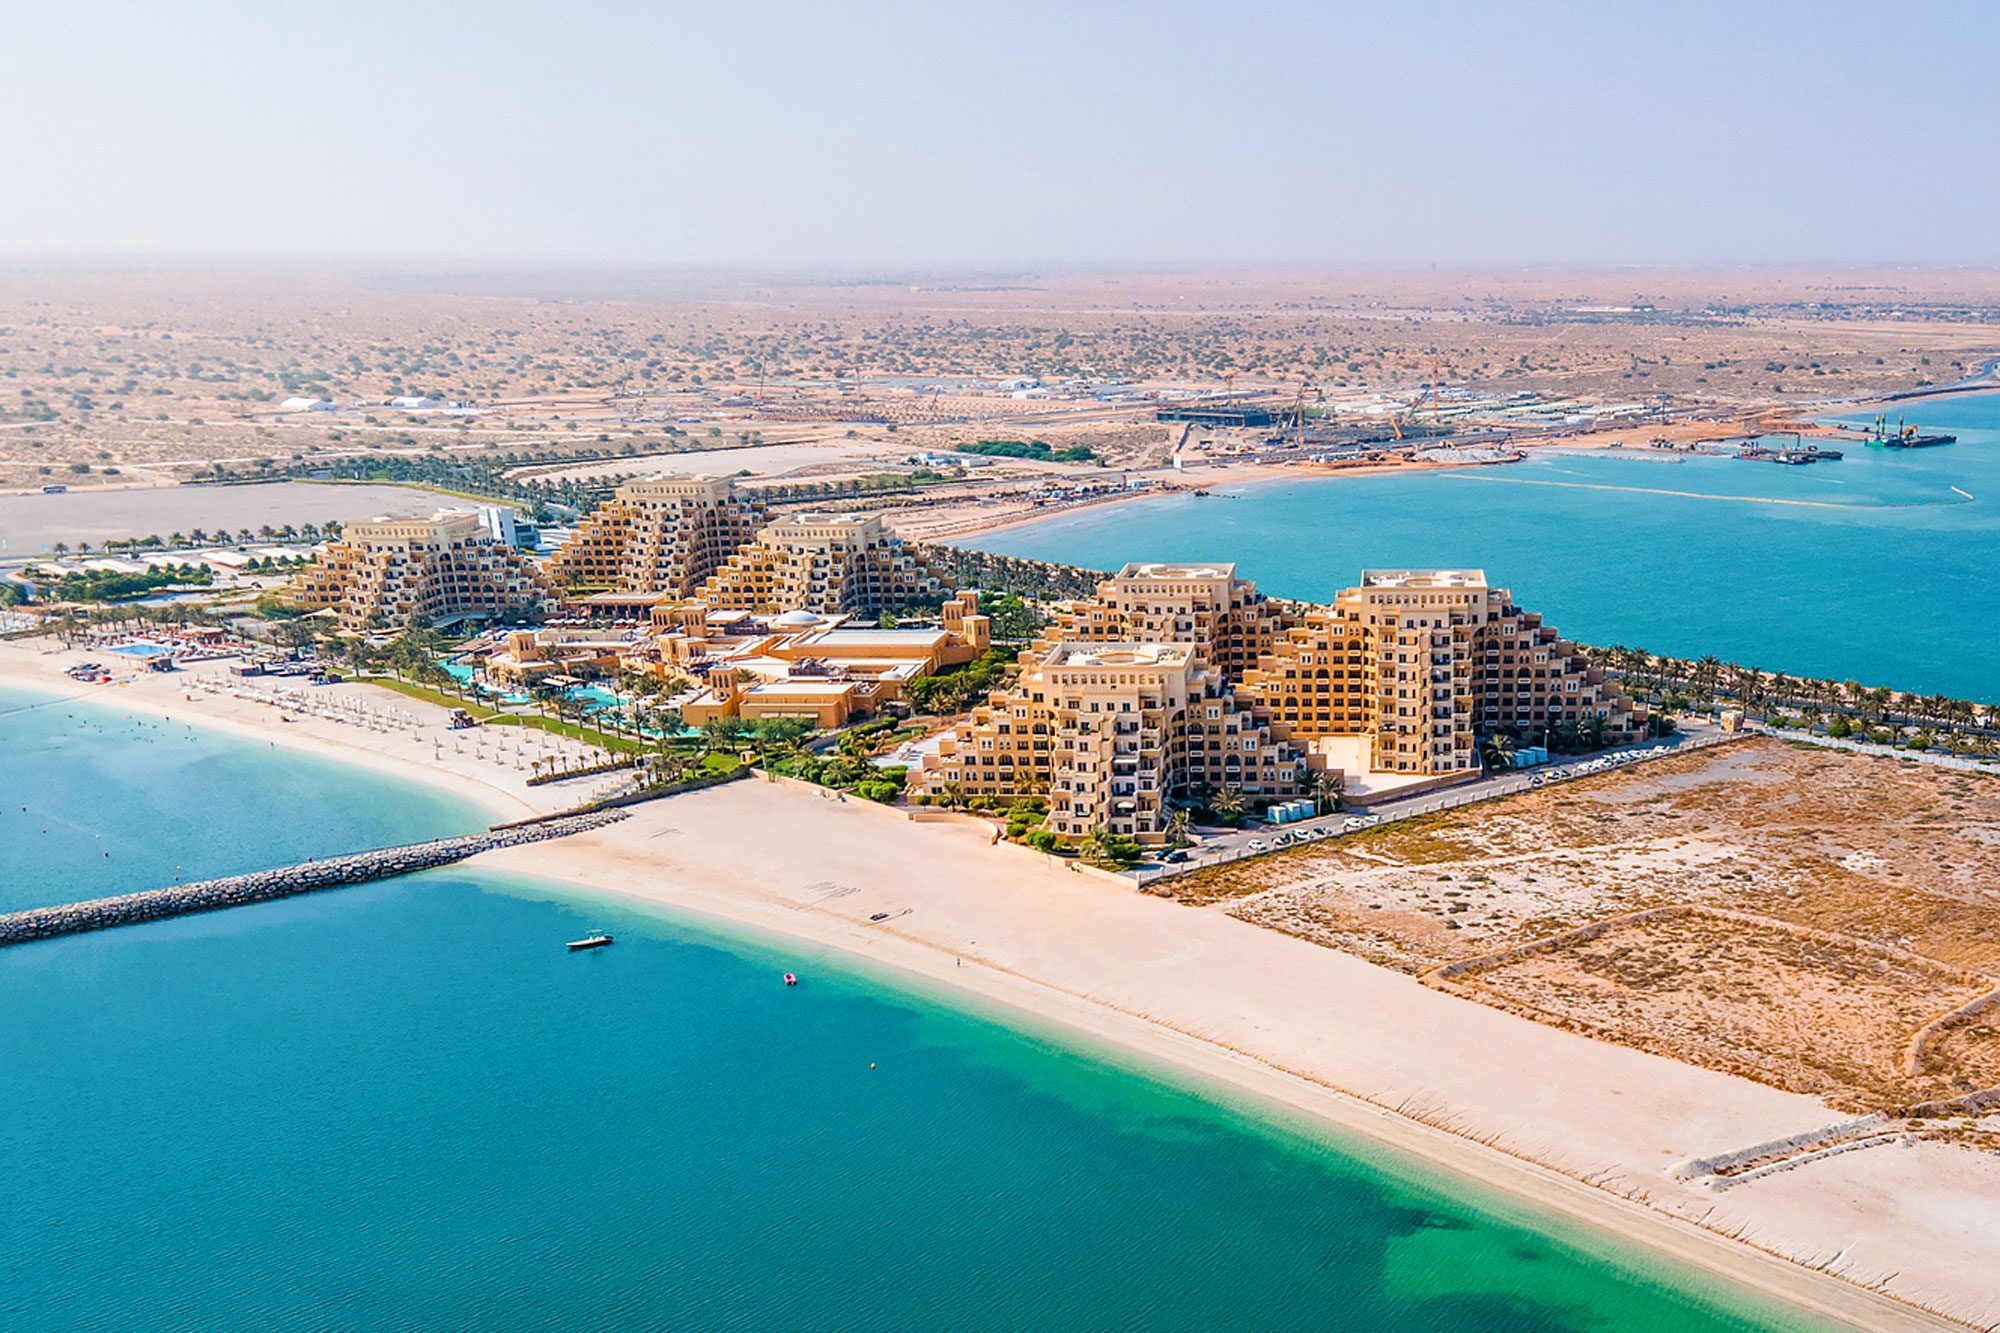 <p><strong>Why you should go:</strong> Seaside vibes in Dubai's under-the-radar neighbor to the north</p> <p>Dubai is always popular, and always full of flashy new attractions and frenetic energy. But if you want an Emirates vacation that's a little more relaxing, head 40 minutes north of the city to this under-the-radar gem. Well, under the radar until 2024, that is, when the luxury Anantara Mina Al Arab Ras Al Khaimah Resort opens and more people realize that it's one of the best places to travel. It's set amid the area's stunning mountains and mangroves in the seaside neighborhood of Mina Al Arab, which is quickly becoming a trendy destination, with new openings and plenty of sunshine.</p> <p>Ras Al Khaimah is a great spot for outdoorsy types, who can snorkel or swim in the crystal-clear turquoise waters, then head off for a quad biking adventure in the desert or soar over the desert on the world's longest zipline. And speaking of world records: If you get a chance to spend New Year's Eve here, don't miss it. The Emirate holds multiple Guinness World Records for its spectacular fireworks performances held during its New Year's celebrations.</p> <p><strong>Where to stay:</strong> The <a href="https://www.anantara.com/en/mina-al-arab-ras-al-khaimah" rel="noopener noreferrer">Anantara Resort</a> here is more than just a getaway from the bustling city. It also boasts Bali-style overwater bungalows for an over-the-top <a href="https://www.rd.com/list/romantic-getaways/" rel="noopener noreferrer">romantic getaway</a>.</p> <p class="listicle-page__cta-button-shop"><a class="shop-btn" href="https://www.anantara.com/en/mina-al-arab-ras-al-khaimah">Book Now</a></p> <h2 class="">About the experts</h2> <ul> <li><strong>Heather Heverling</strong> is the president and managing director (North America) at <a href="https://www.audleytravel.com/us/" rel="noreferrer noopener">Audley Travel</a>, a custom tour operator that designs trips to more than 75 destinations around the world, each tailored to the client's budget, interests and travel style.</li> <li><strong>Nick Cunningham </strong>is the European destination manager for <a href="https://www.scottdunn.com/us" rel="noreferrer noopener">Scott Dunn</a>, a bespoke tour company offering luxury and highly customized travel experiences.</li> <li><strong>Melanie Fish</strong> is a travel expert at <a href="https://www.expedia.com" rel="noreferrer noopener">Expedia</a>.</li> <li><strong>Brady Binstadt </strong>is the CEO of <a href="https://www.geoex.com/" rel="noreferrer noopener">GeoEx, or Geographic Expeditions</a>, a travel adventure company.</li> <li><strong>Vasco Borges</strong> is the owner of <a href="https://www.beachenclave.com" rel="noreferrer noopener">Beach Enclave Turks and Caicos</a> and an avid kiteboarder.</li> </ul>